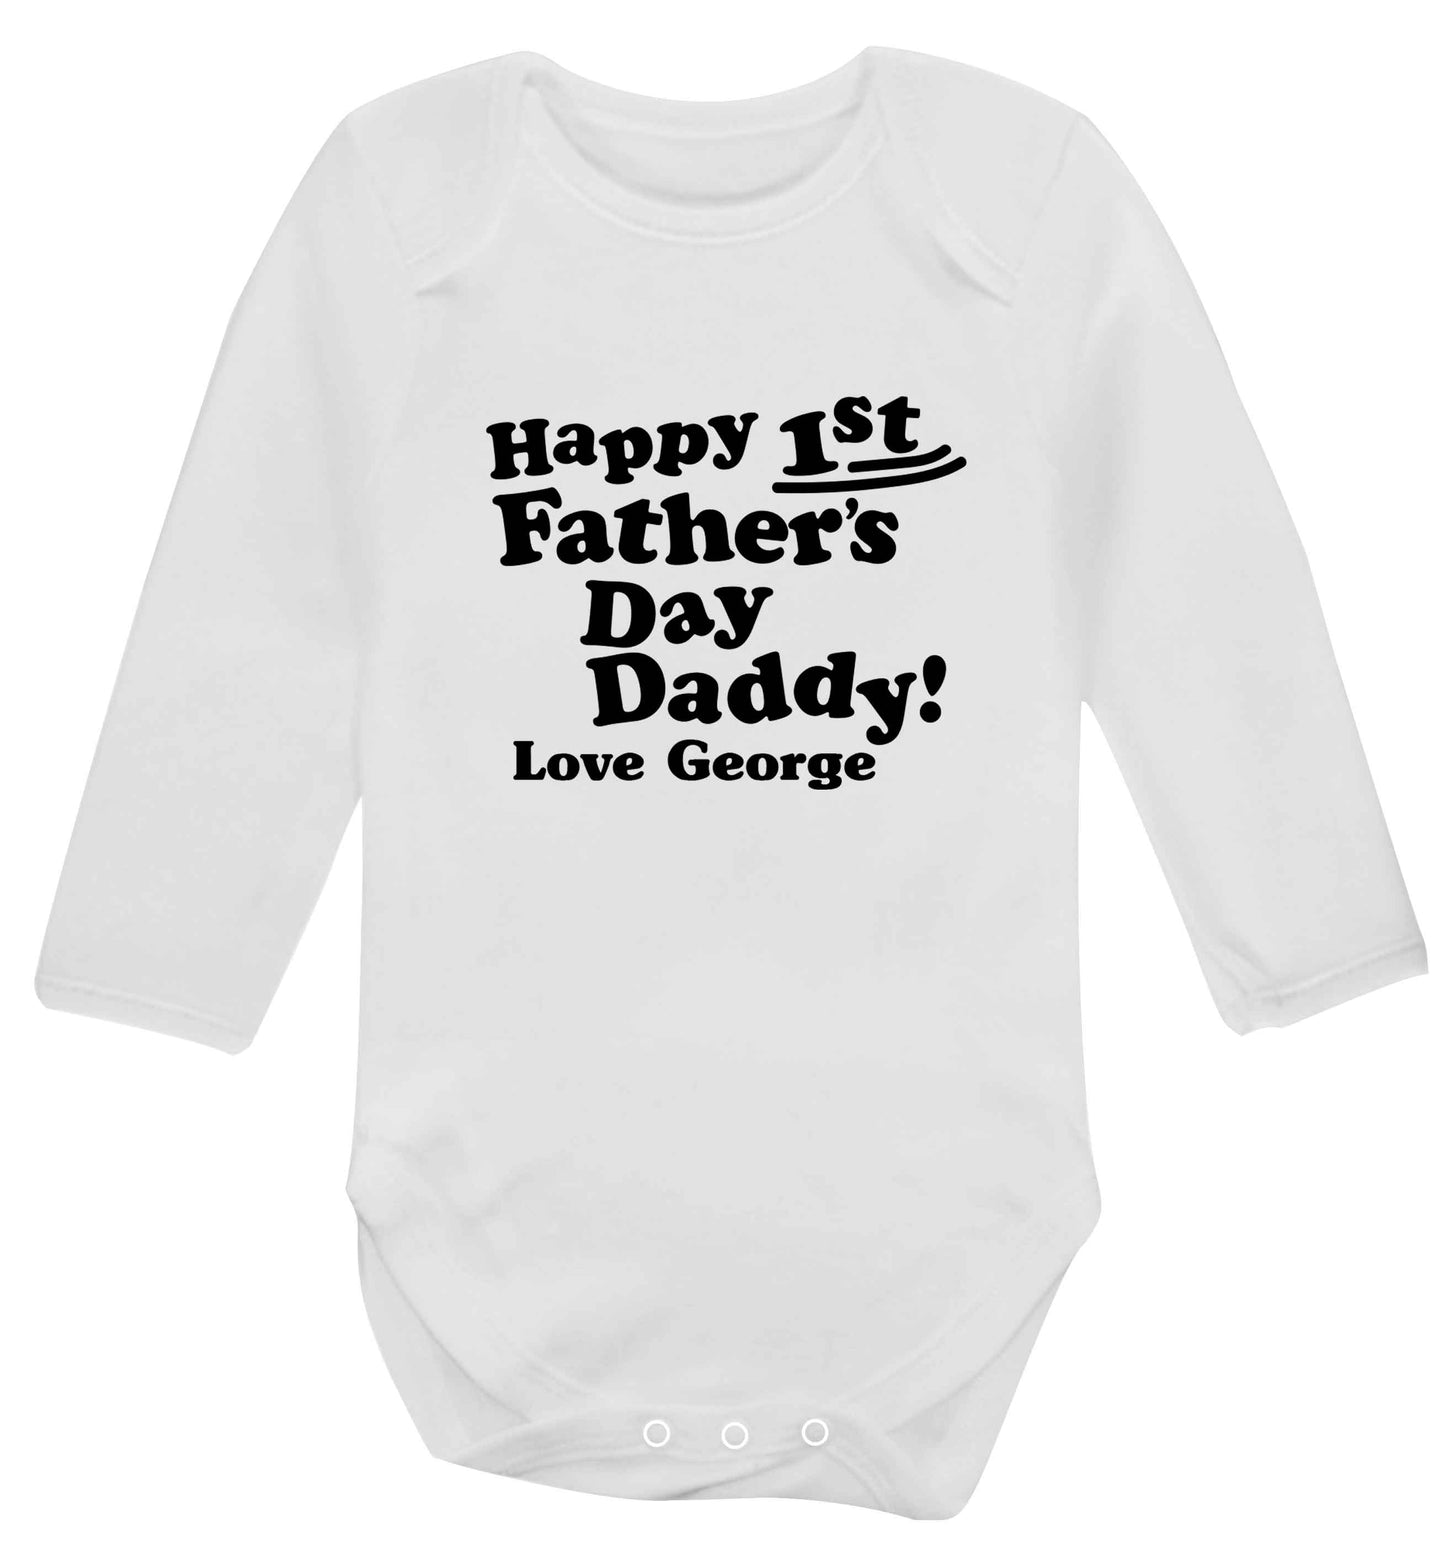 Happy first Fathers Day daddy love personalised baby vest long sleeved white 6-12 months